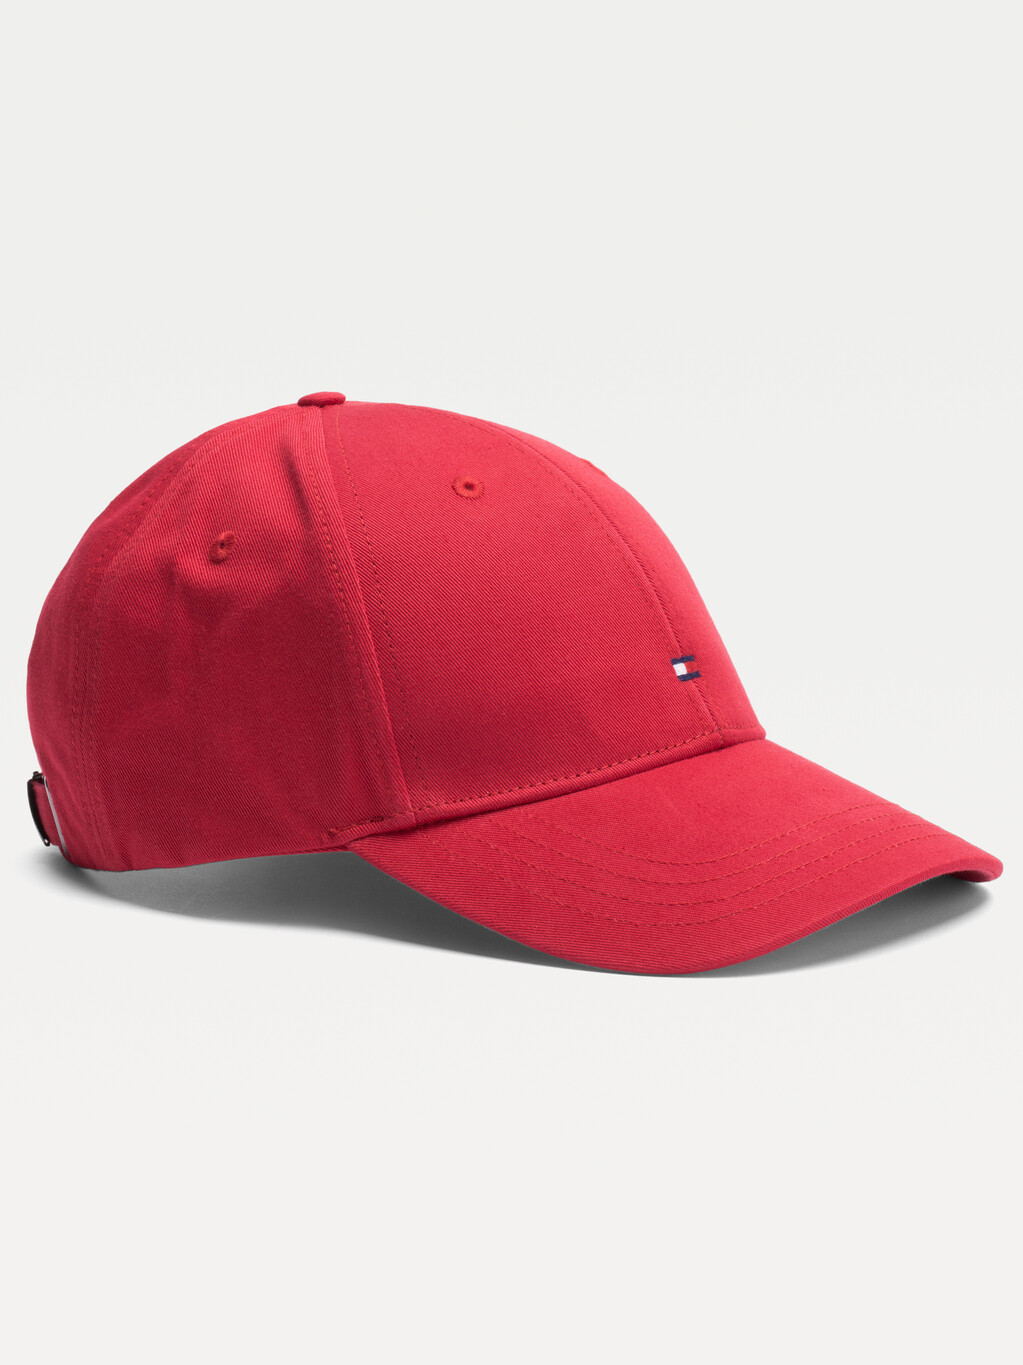 Buy CLASSIC BASEBALL CAP in color APPLE RED